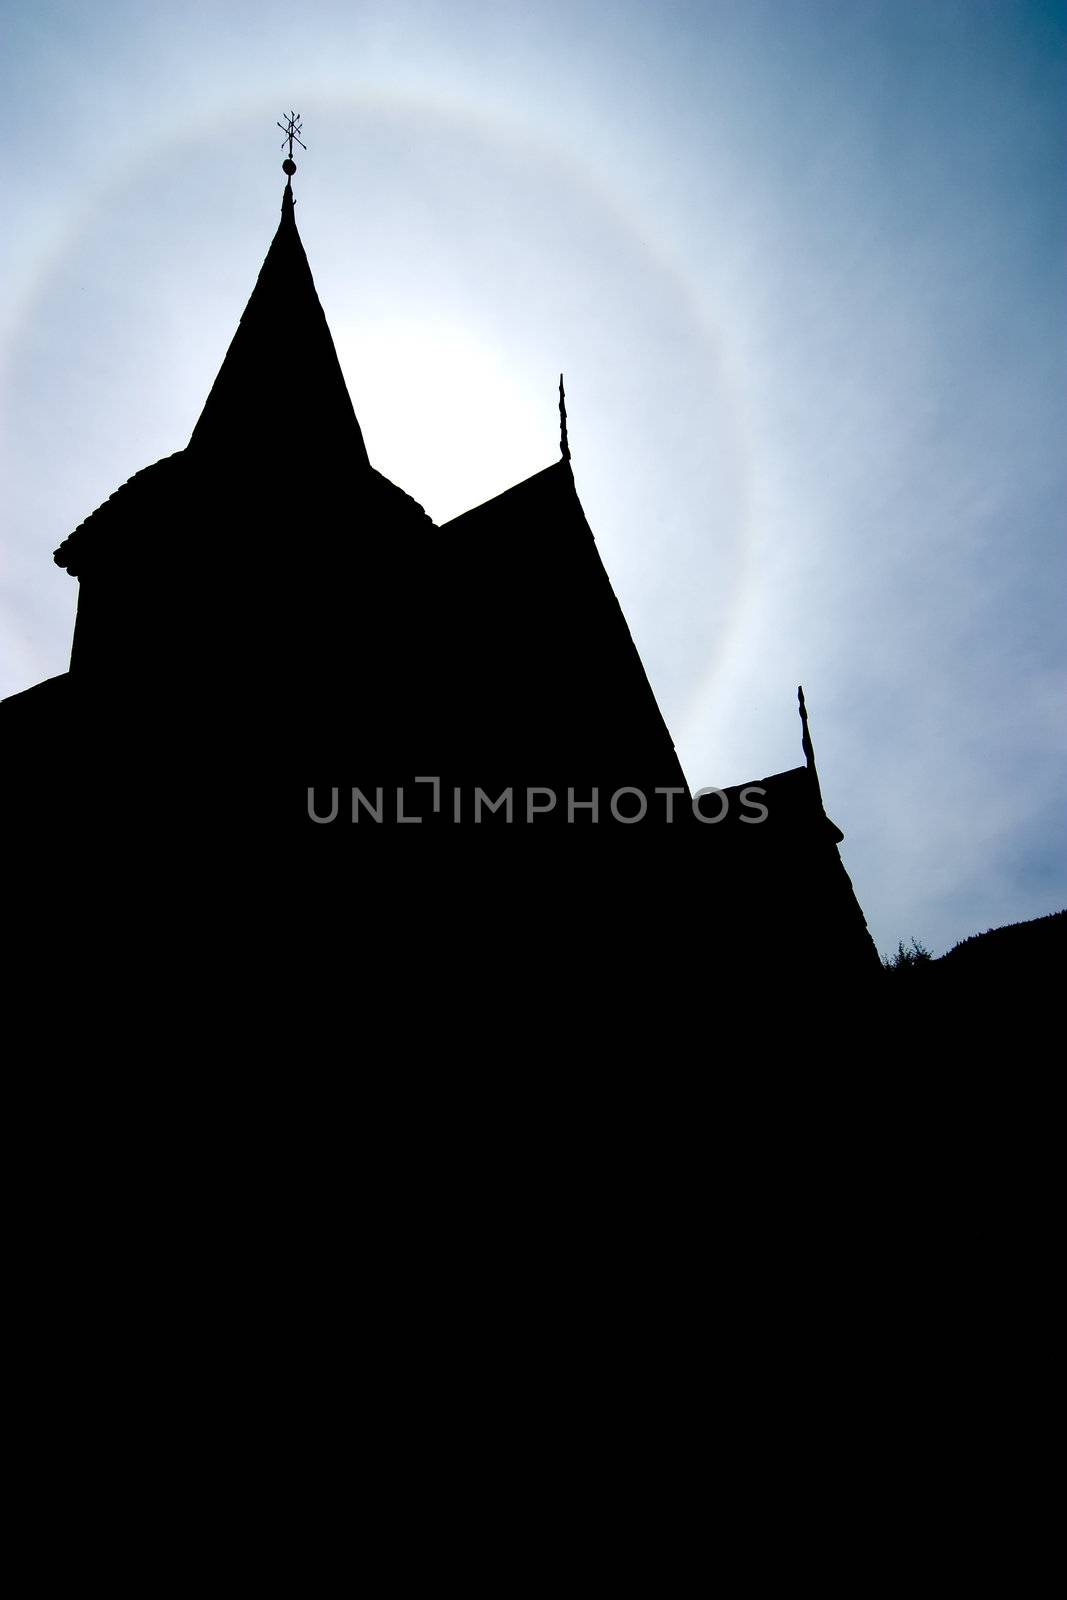 A silhouette of an old Norwegian Stave Church